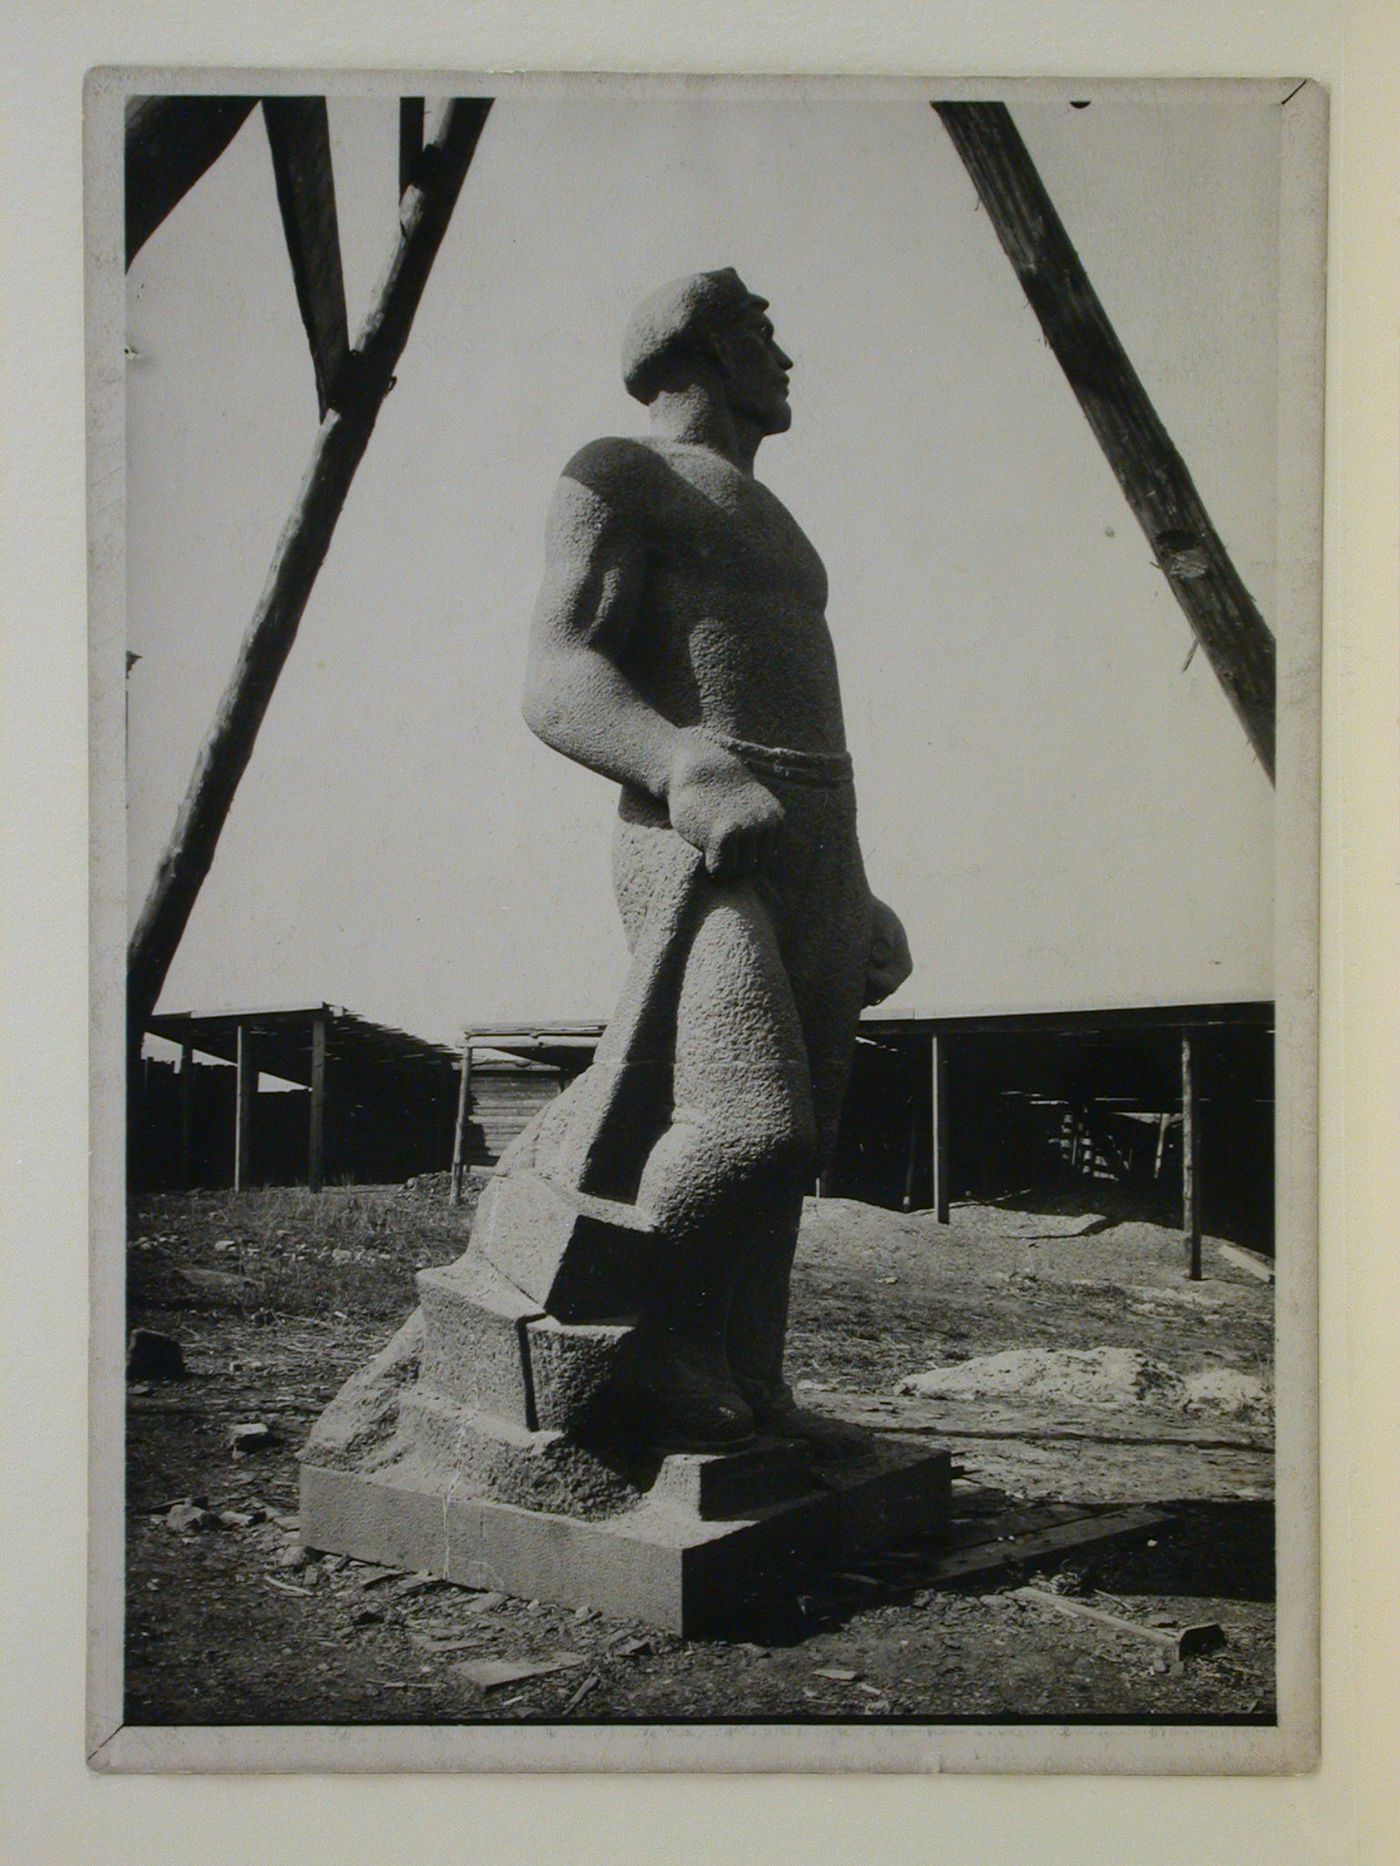 View of a statue of a worker for the monument to the Fighters of the Revolution, Saratov, Soviet Union (now in Russia)